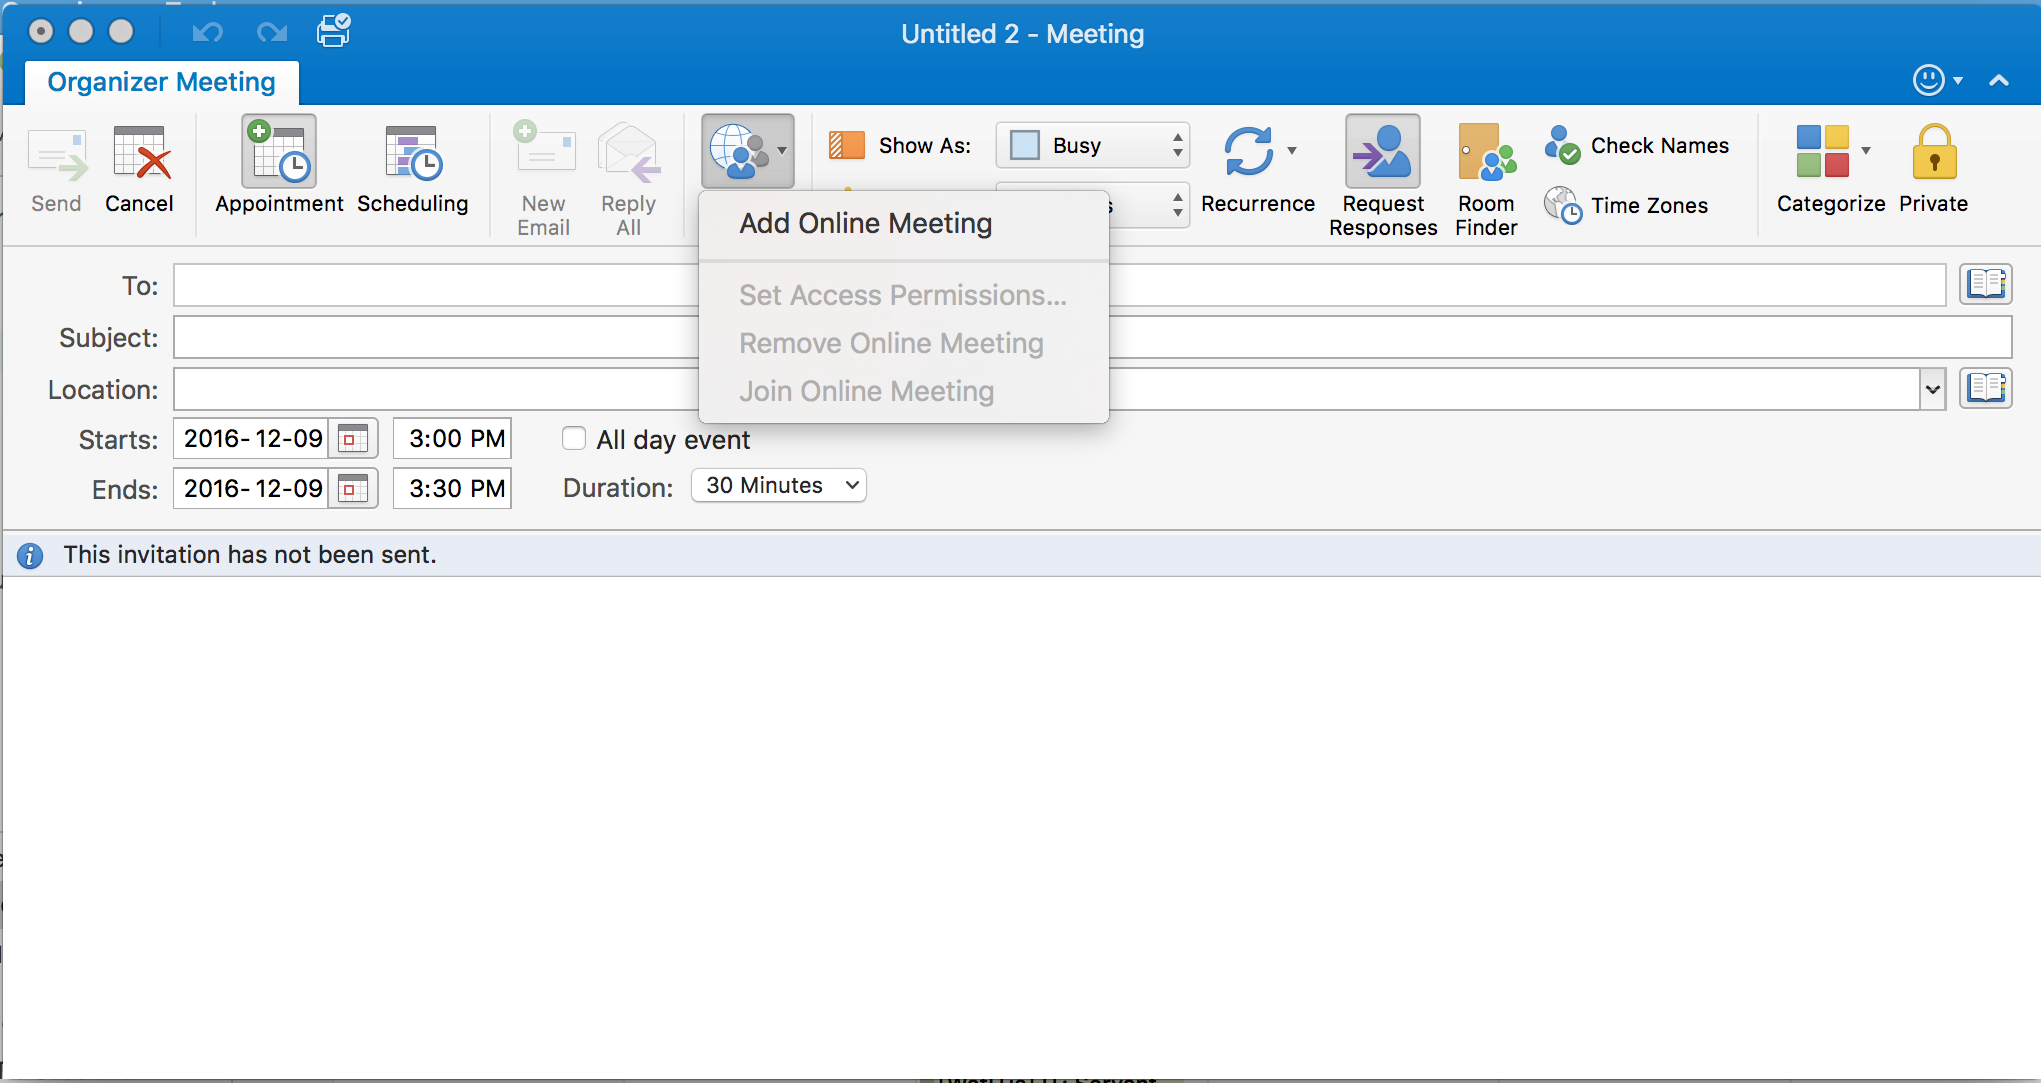 Screen capture showing the Add Online Meeting option selected